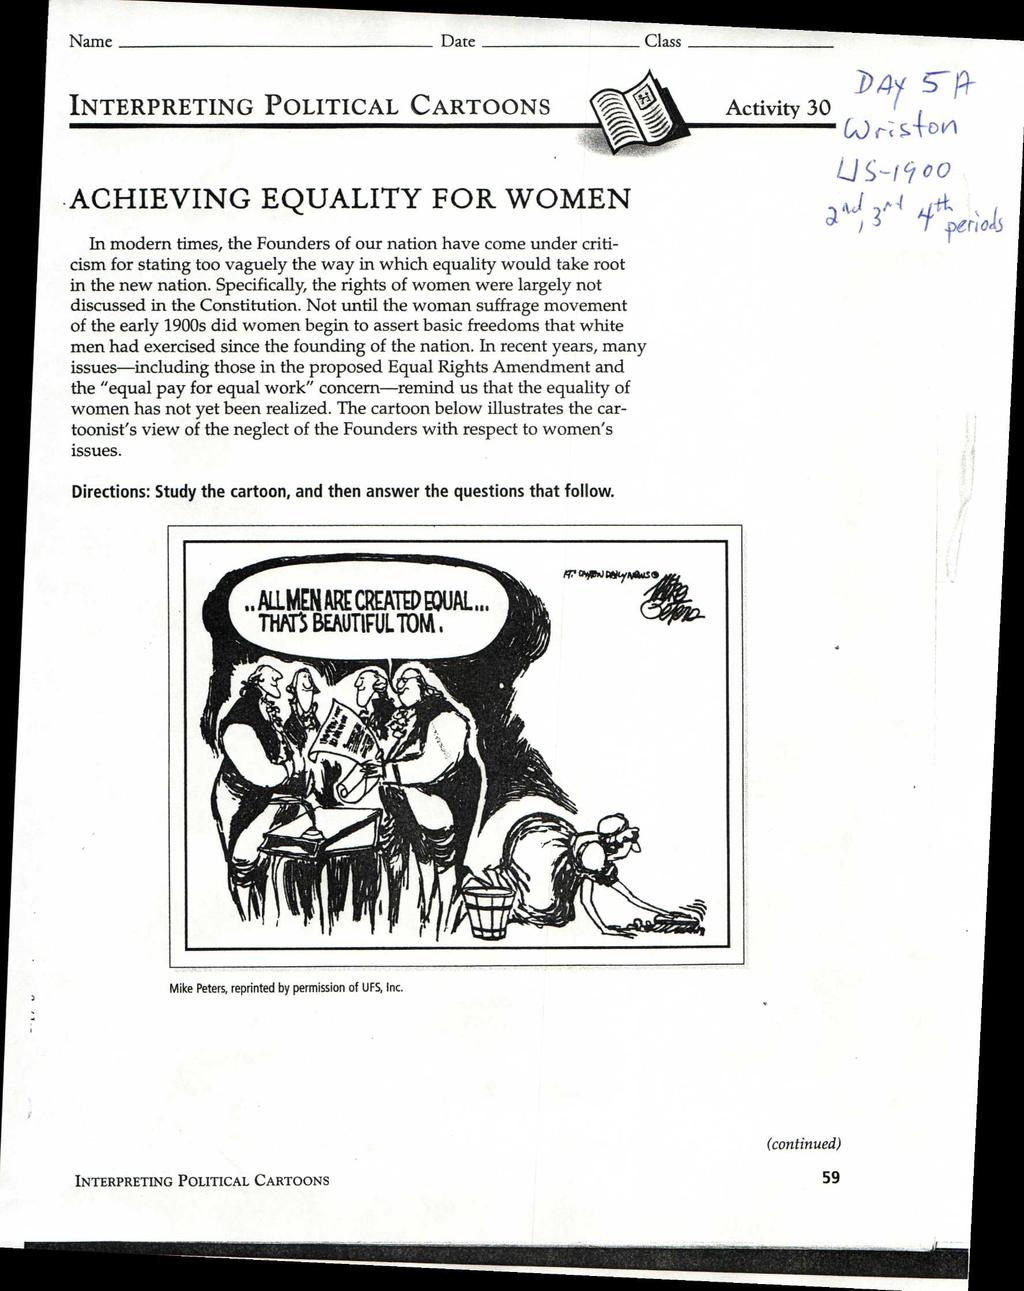 Name Date Cl ass INTERPRETING POLITICAL CARTOONS Activity 30 (A) r-; ACHIEVING EQUALITY FOR WOMEN In modern times, the Founders of our nation have come under criticism for stating too vaguely the way